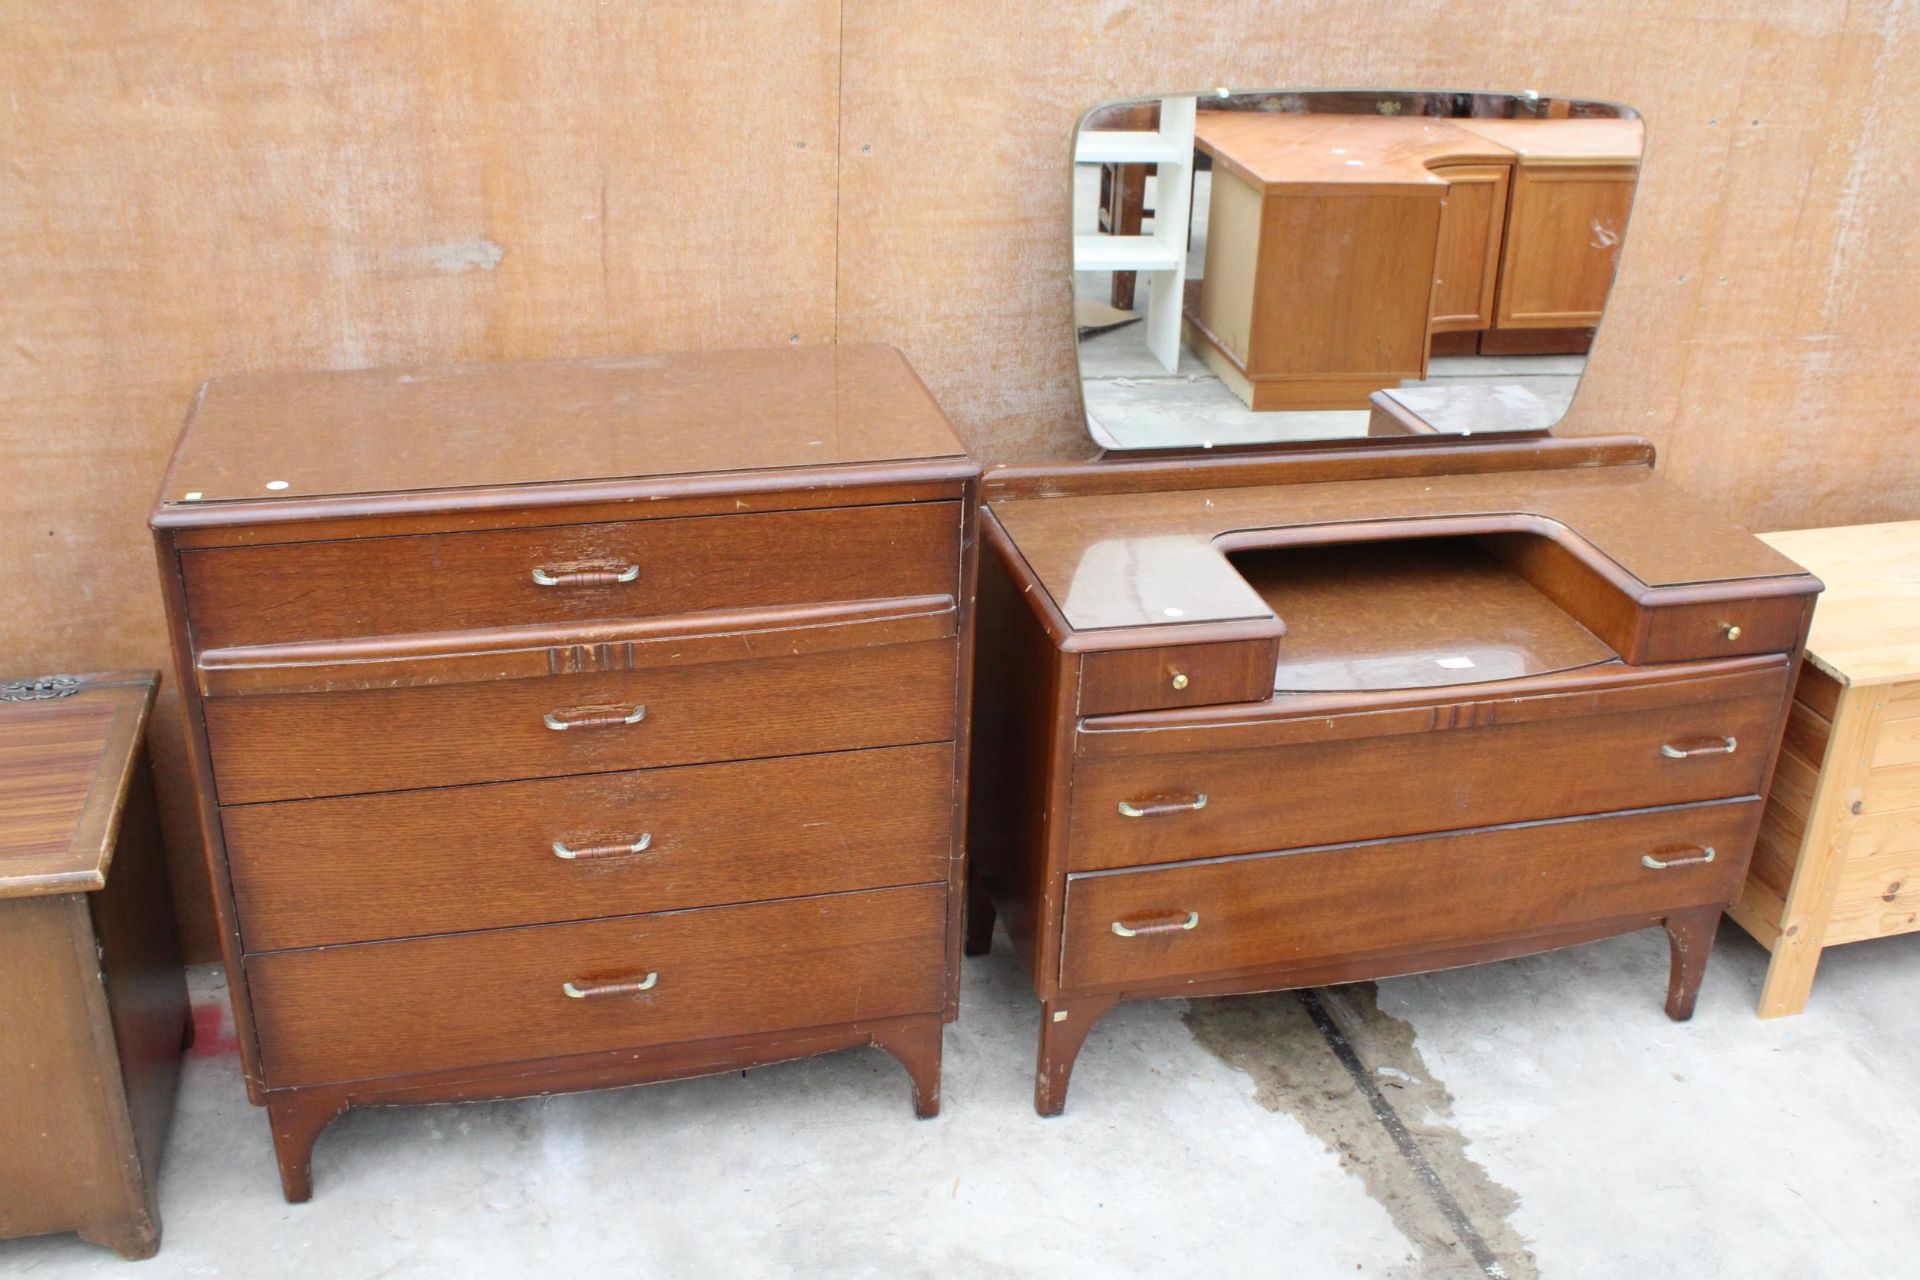 A RETRO LEBUS OAK CHEST OF FOUR DRAWERS, 31" WIDE, AND MATCHING DRESSING CHEST, 37" WIDE